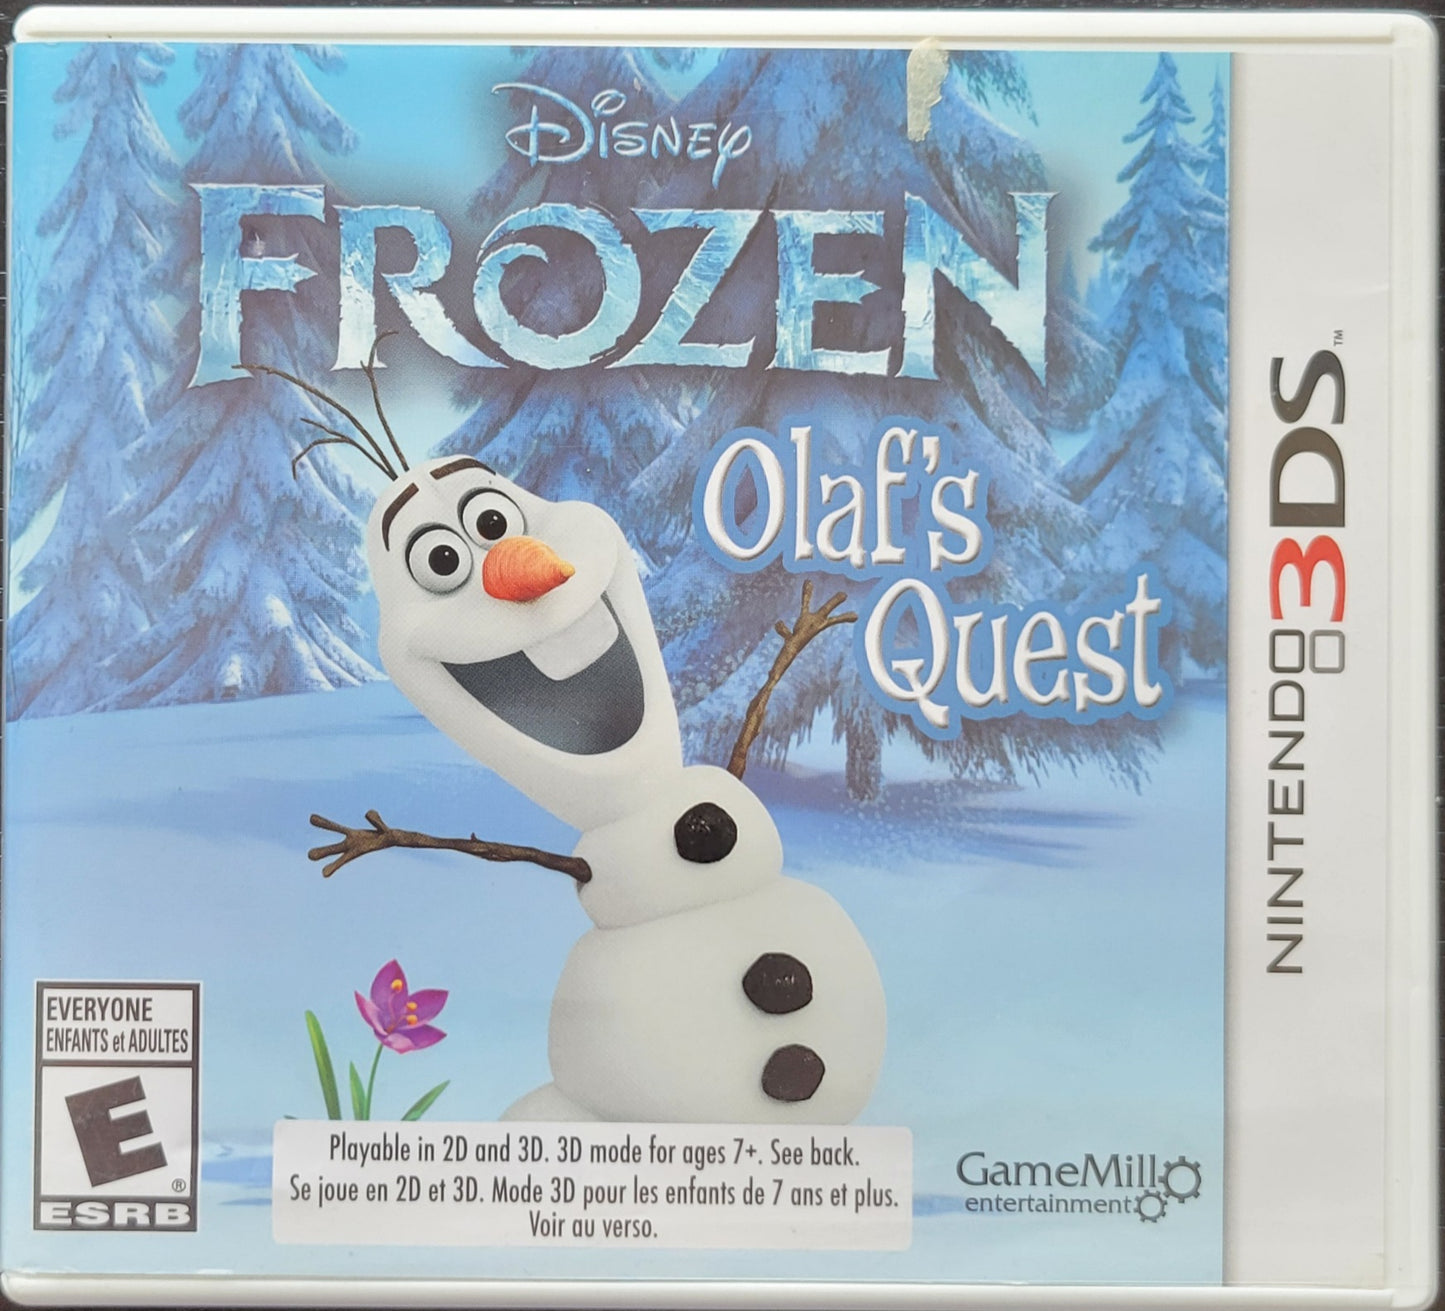 Disney's FROZEN: Olaf's Quest - Nintendo 3DS 2008 - Handheld Console NTSC Cartridge Tested & Working